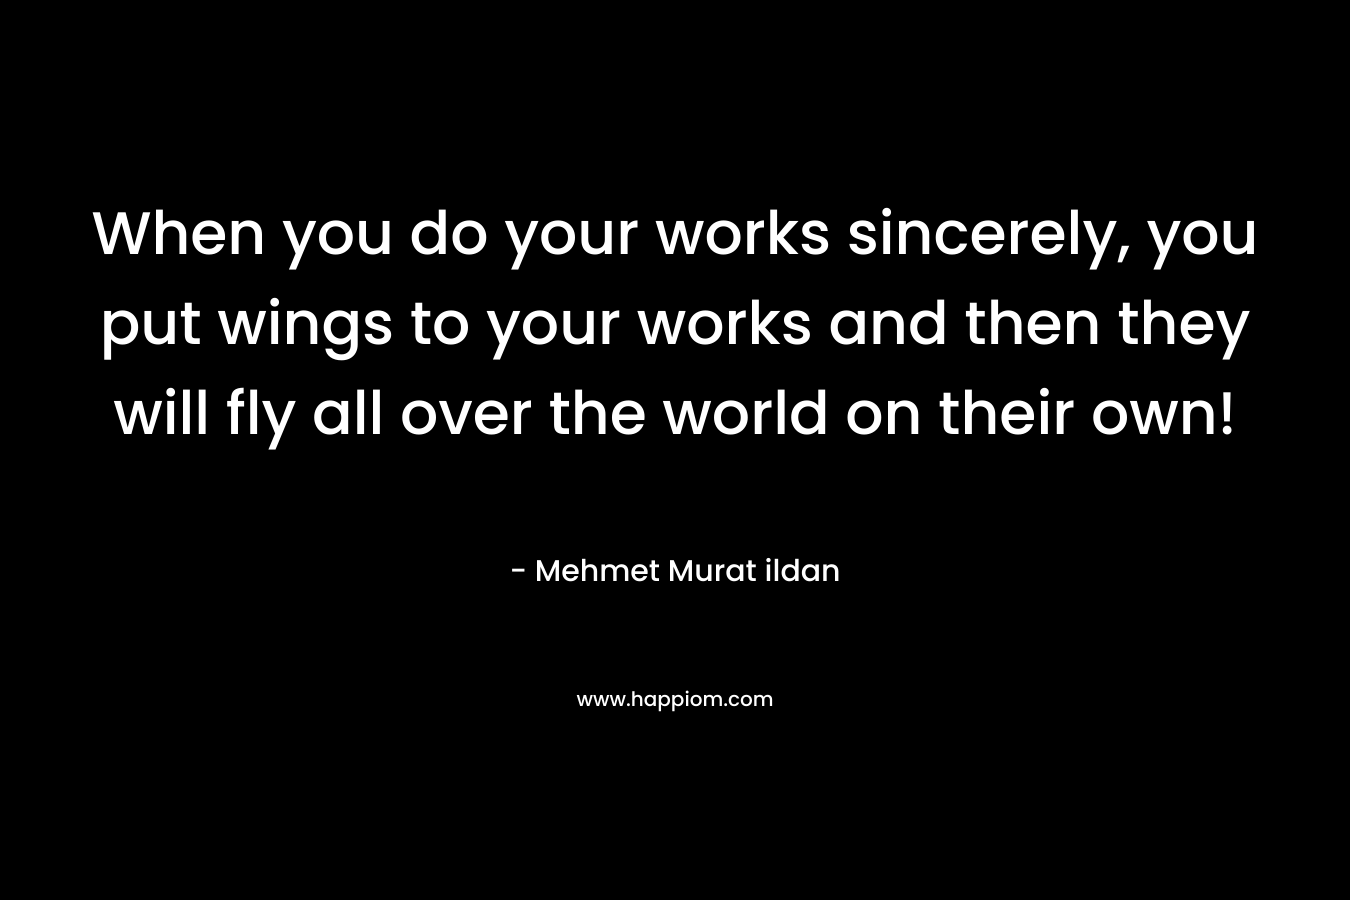 When you do your works sincerely, you put wings to your works and then they will fly all over the world on their own!